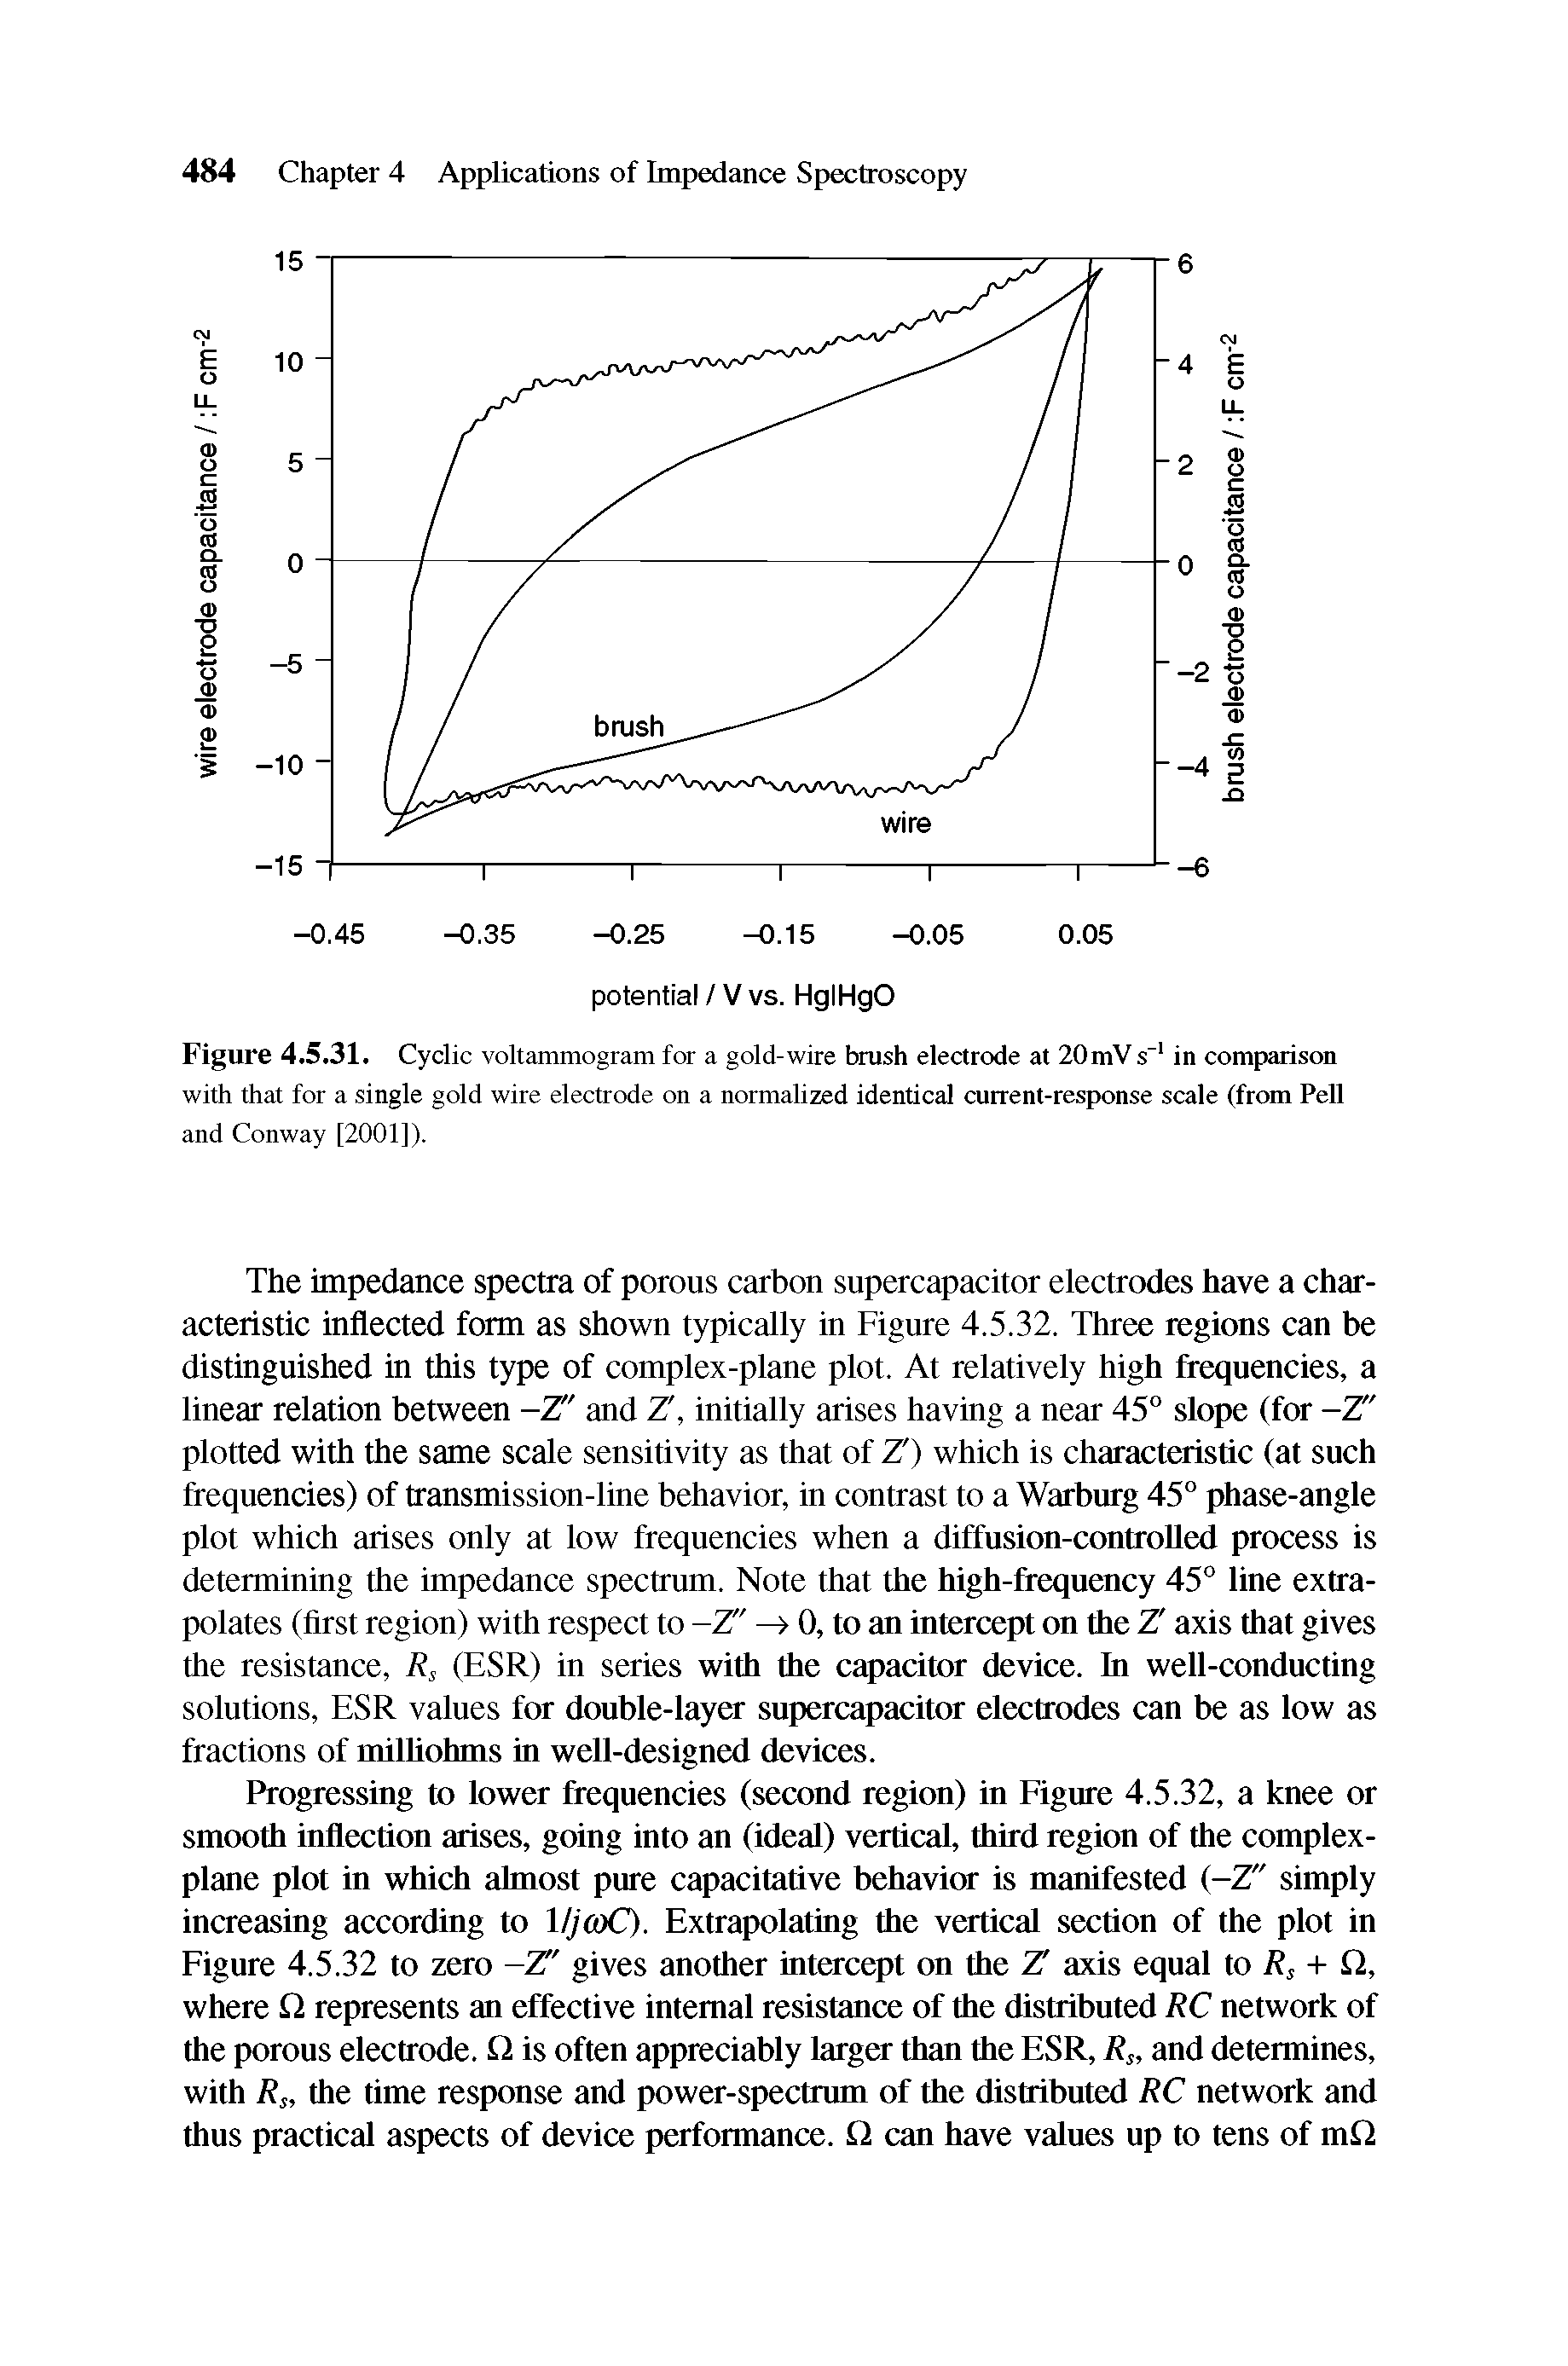 Figure 4.5.31. Cyclic voltammogram for a gold-wire brush electrode at 20mVs" in comparison with that for a single gold wire electrode on a normalized identical current-response scale (from Pell and Conway [2001]).